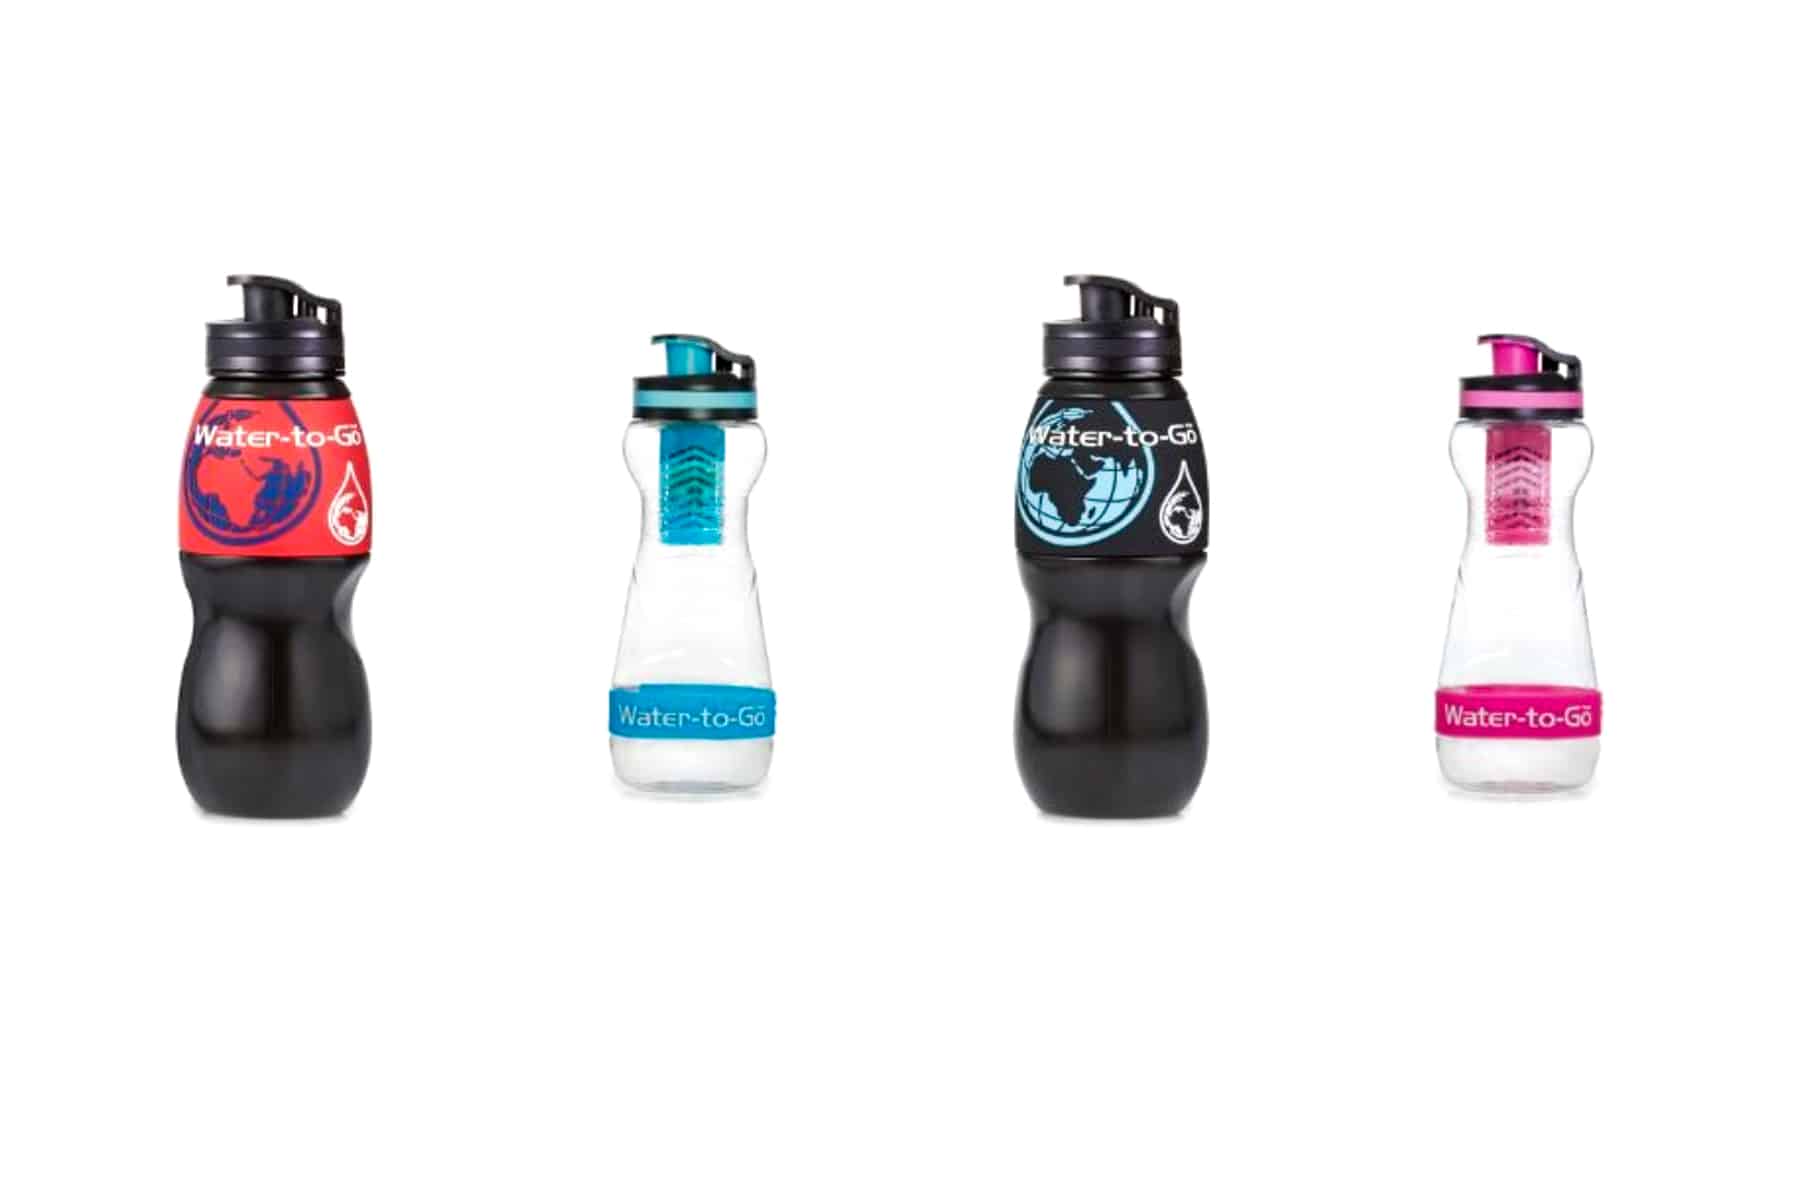 Four branded Water-to-Go travel filter water bottles - black and red, clear and blue, black, blue and white, and pink and clear.